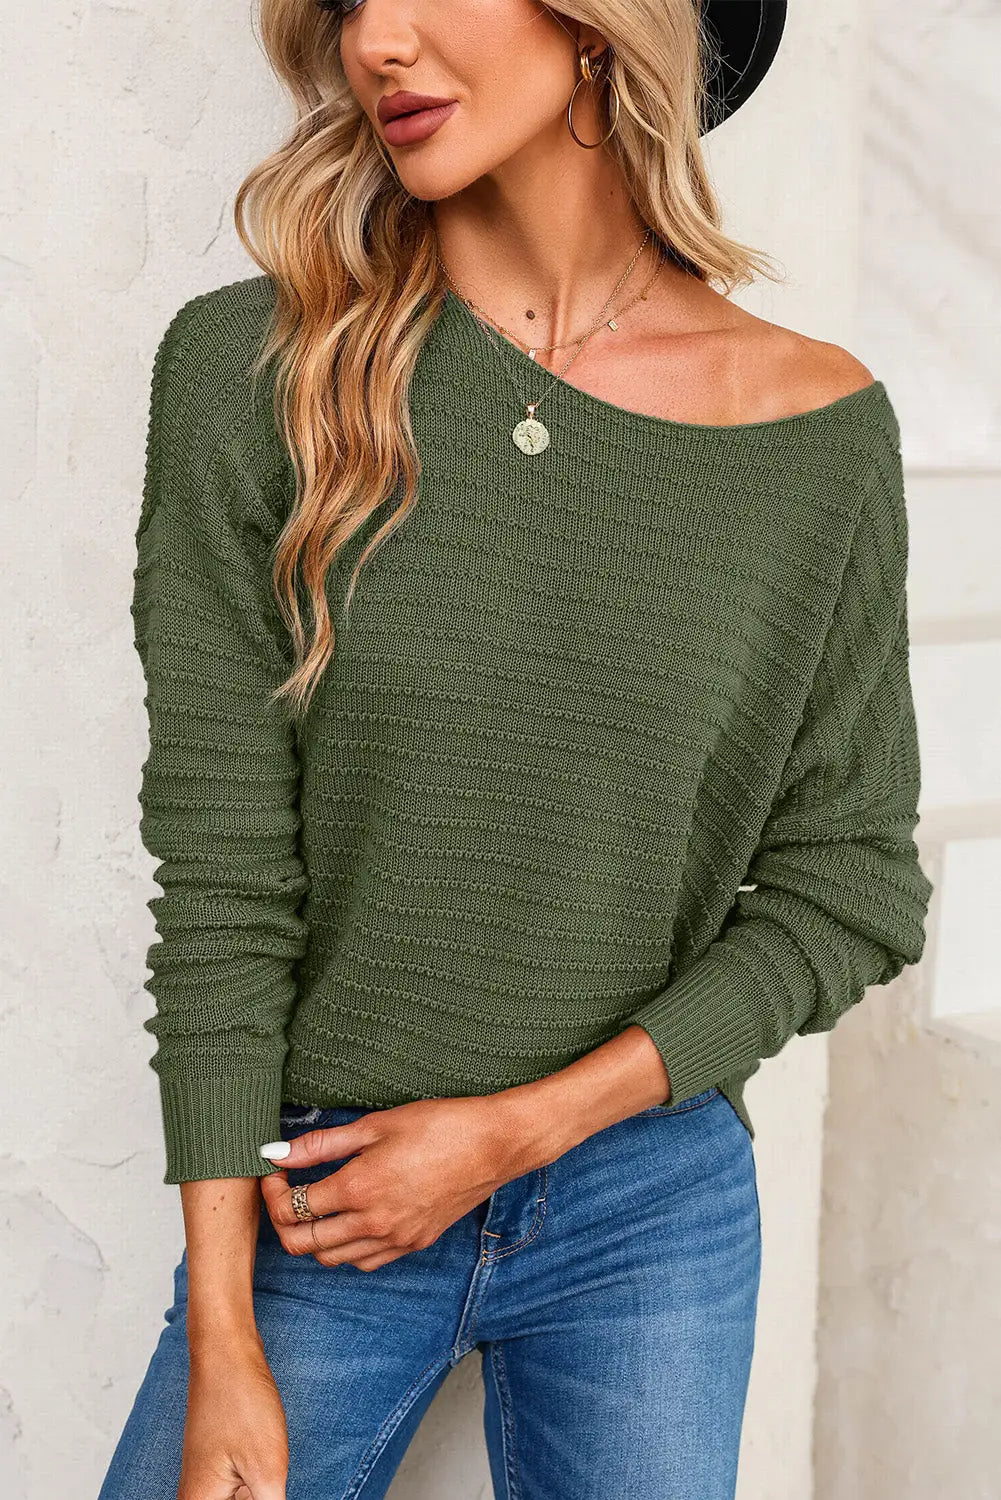 Green textured knit round neck dolman sleeve sweater - sweaters & cardigans